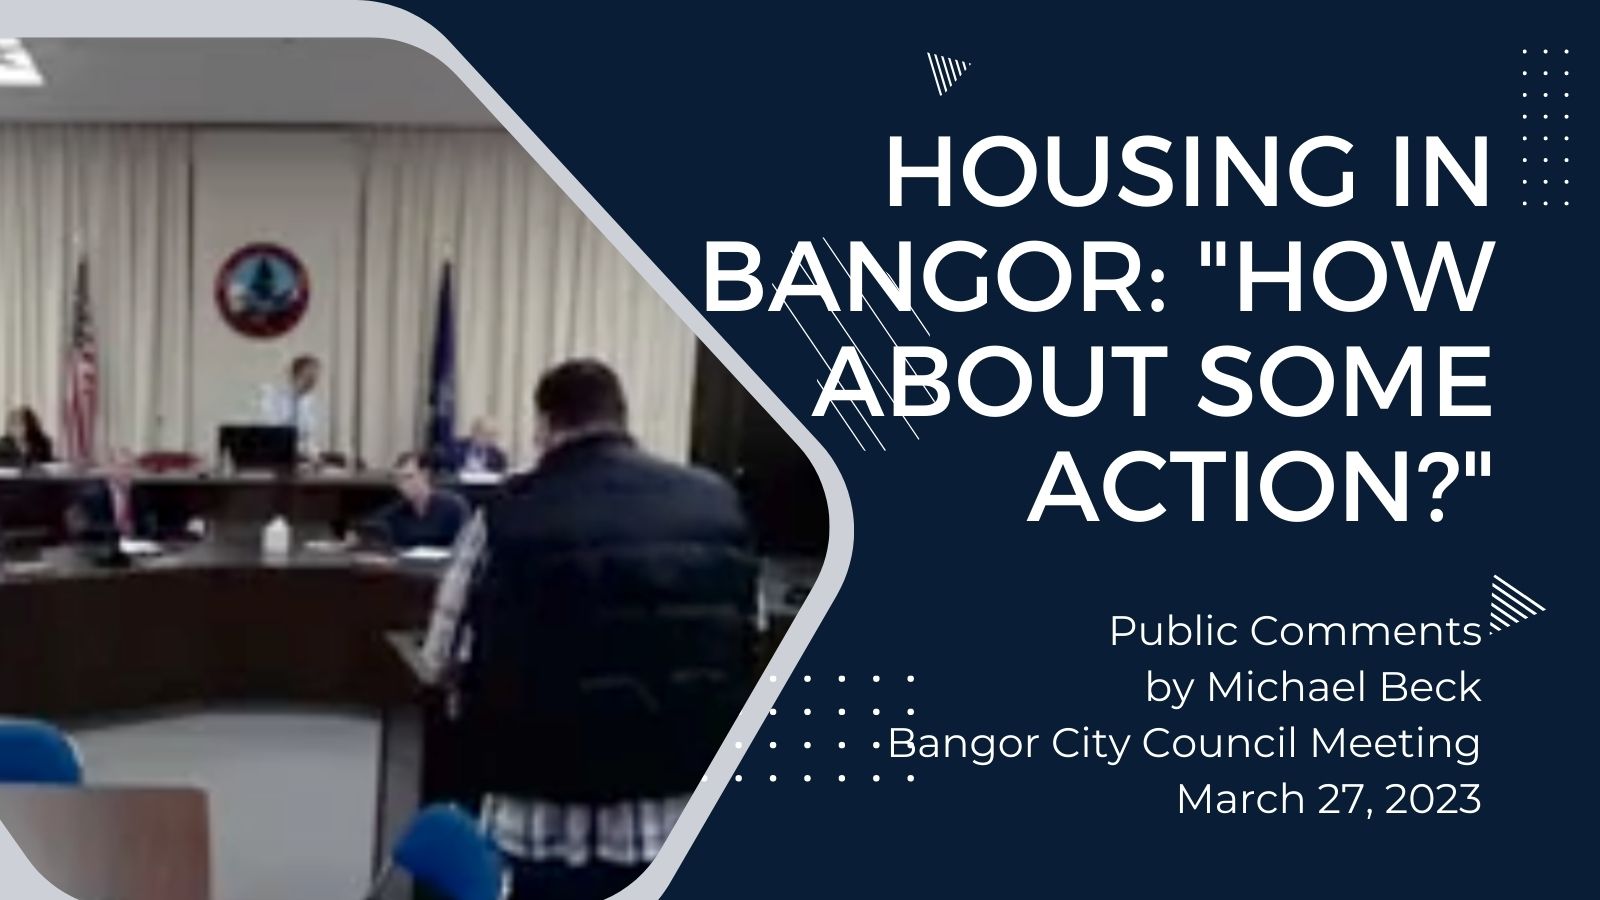 YouTube Thumbnail of Michael Beck giving public comment to Bangor City Council with the headline, "Housing in Bangor: How About Some Action?"